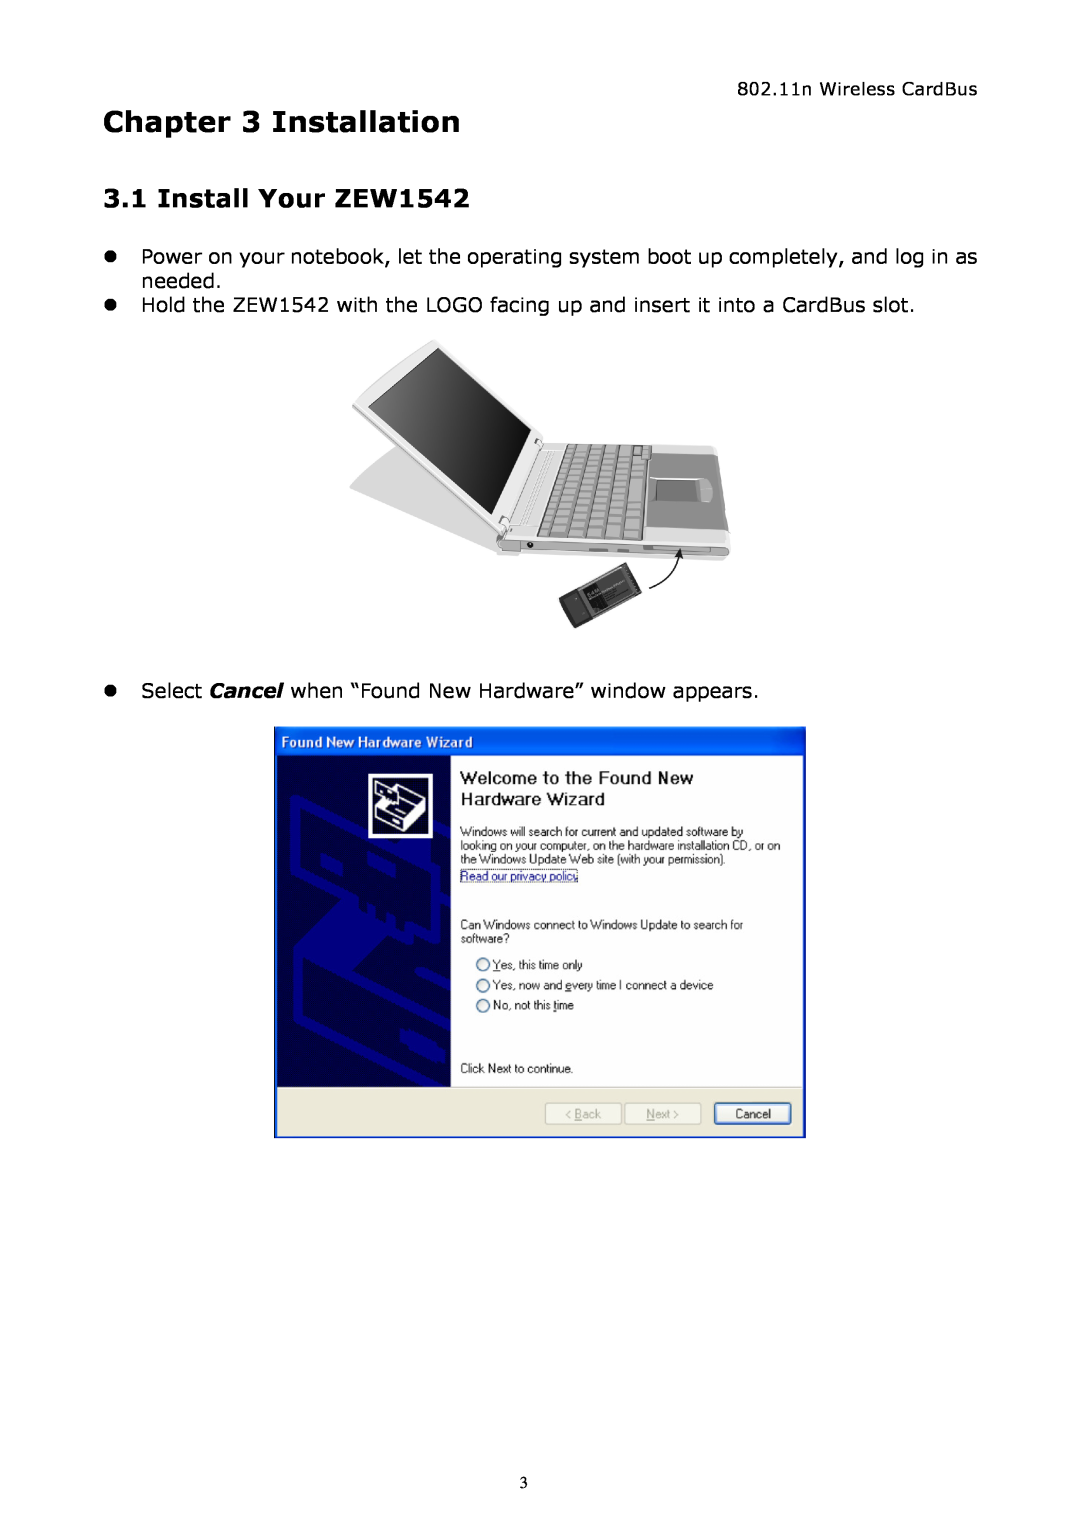 Zonet Technology manual Installation, Install Your ZEW1542 